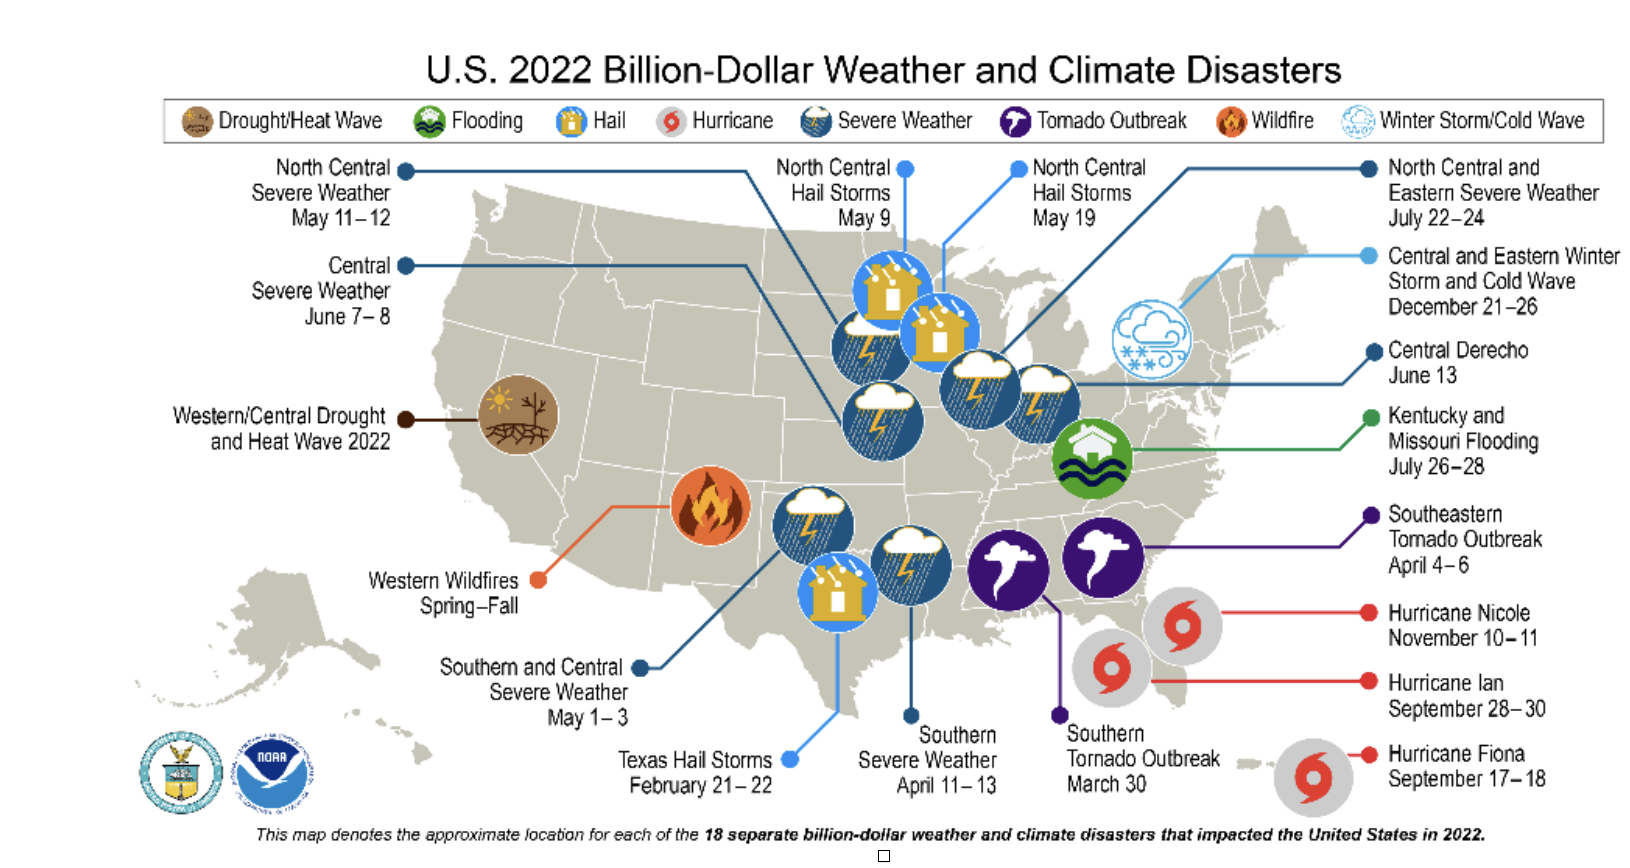 U.S. 2022 Billion-Dollar Weather and Climate Disasters